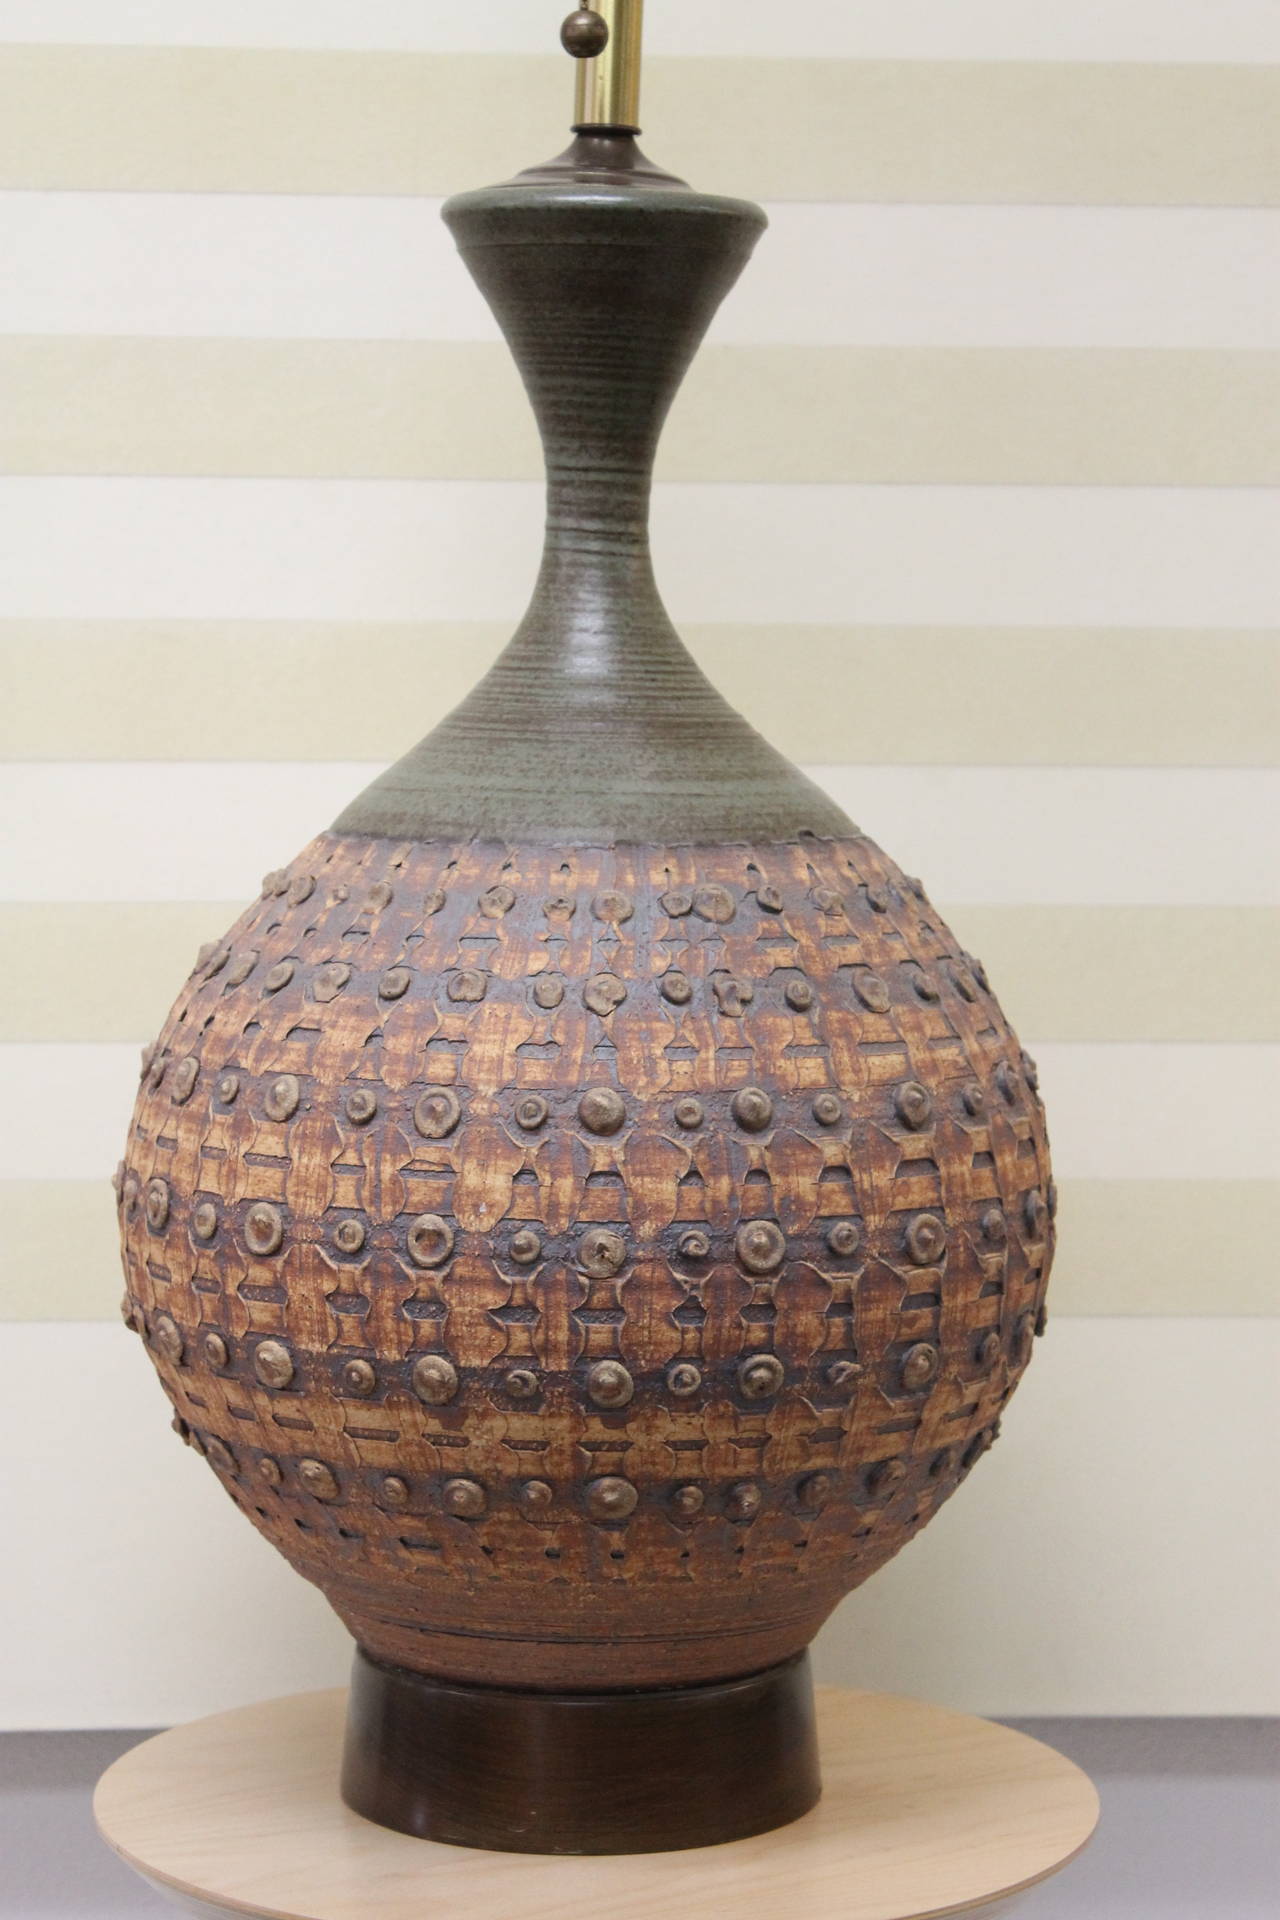 Monumental Bob Kinzie stoneware lamp for Raul Coronel with original shade. Absolutely one of the best Bob Kinzie lamps we have seen, and huge to boot, measuring 29 1/2